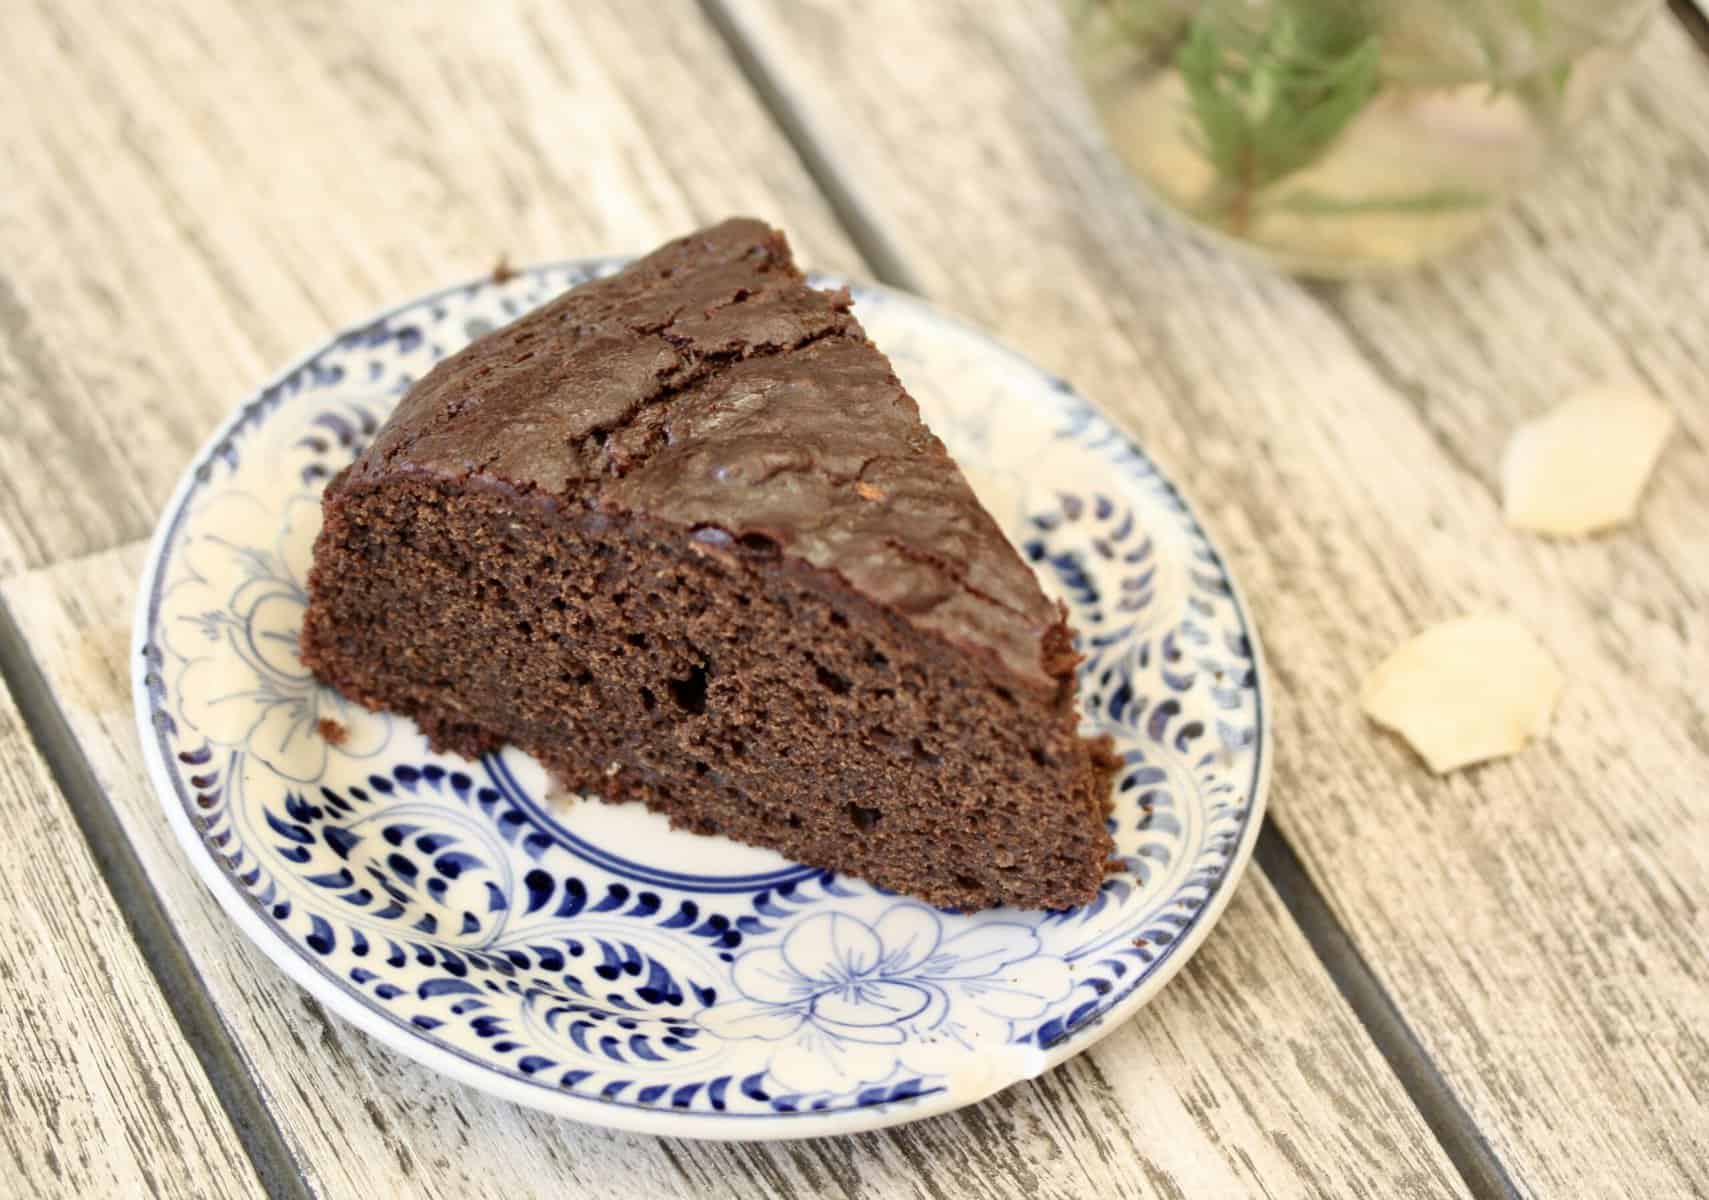 A slice of gluten-free chocolate zucchini cake on a blue and white plate.